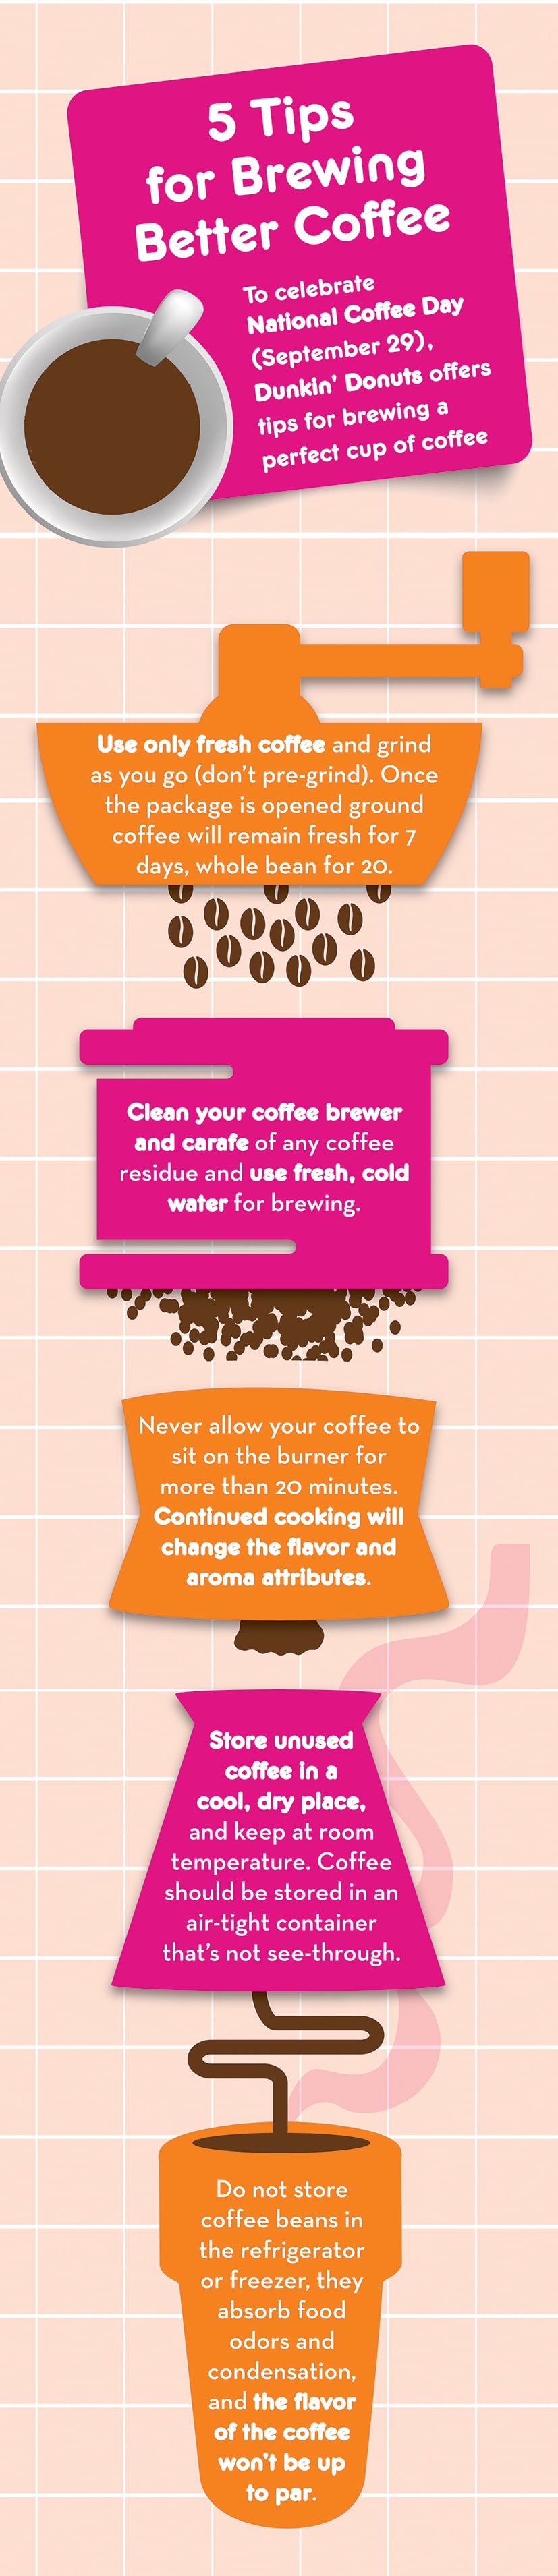 Coffee Brewing Tips For Ultimately Better Tasting Coffee [Infographic]